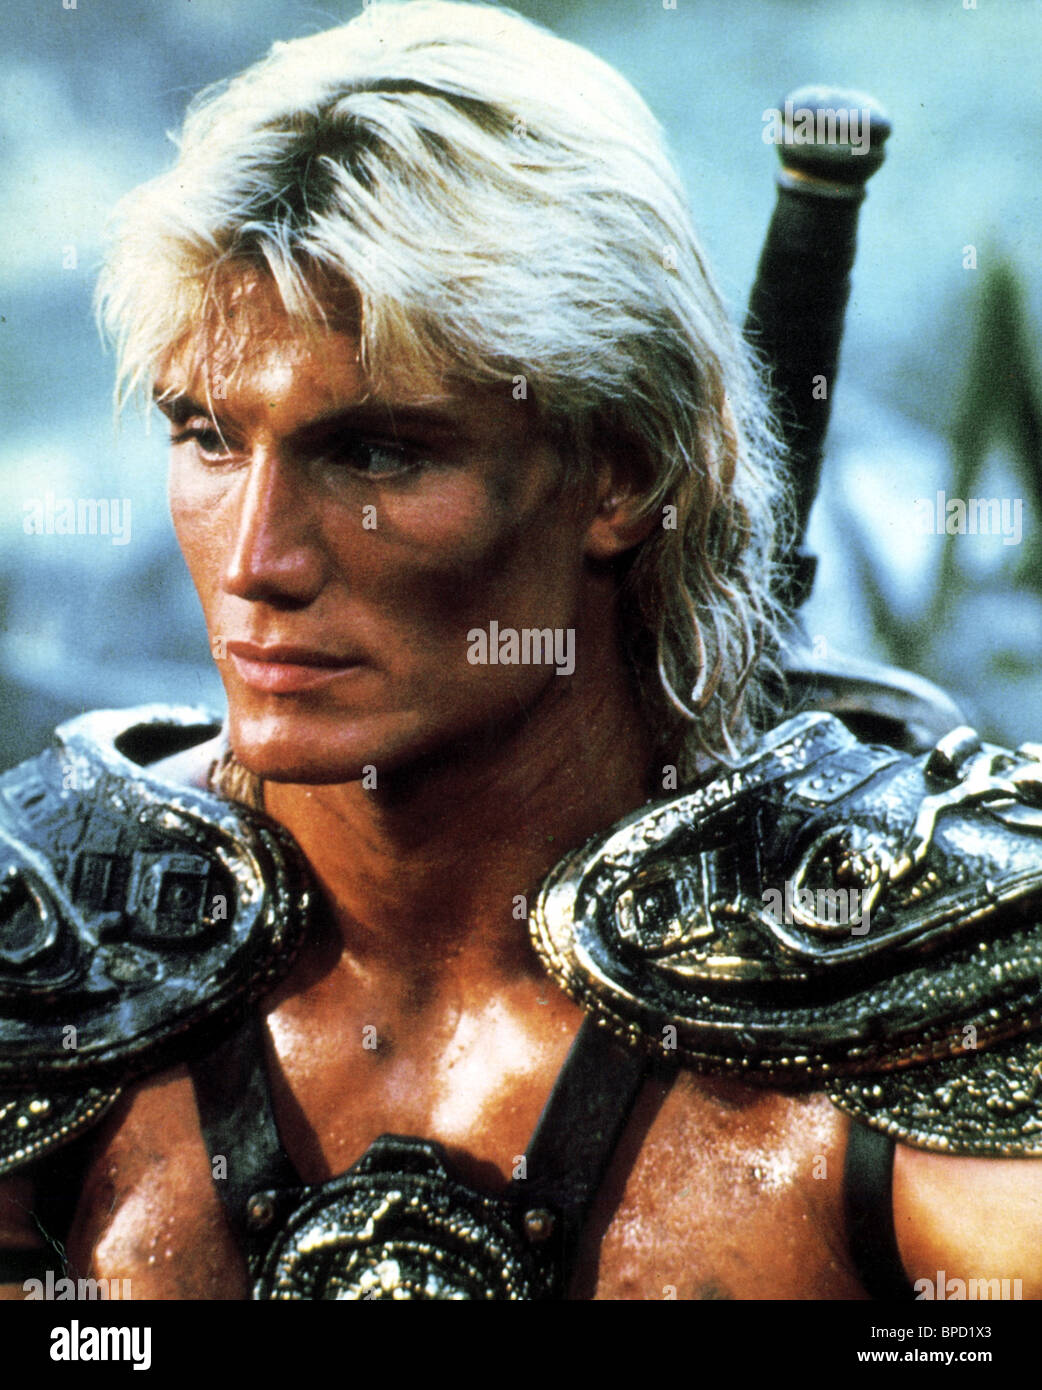 DOLPH LUNDGREN MASTERS OF THE UNIVERSE (1987 Stock Photo ...